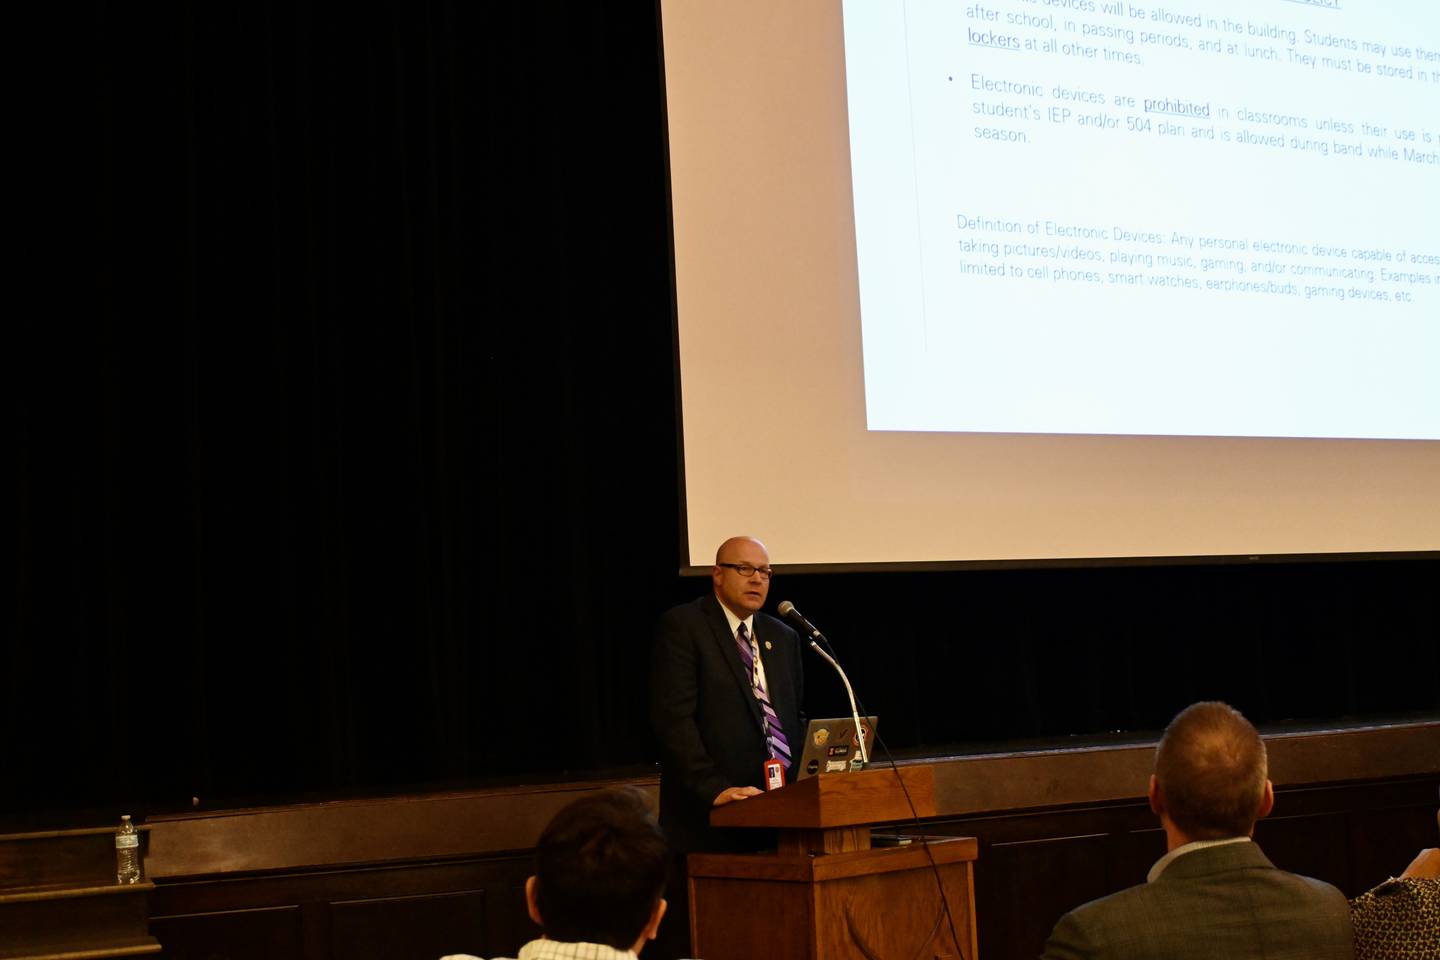 La Salle- Peru Superintendent Steven Wrobleski speaks about the implementation of a new cell phone policy during Wednesday nights forum at Matthiessen Memorial Auditorium.